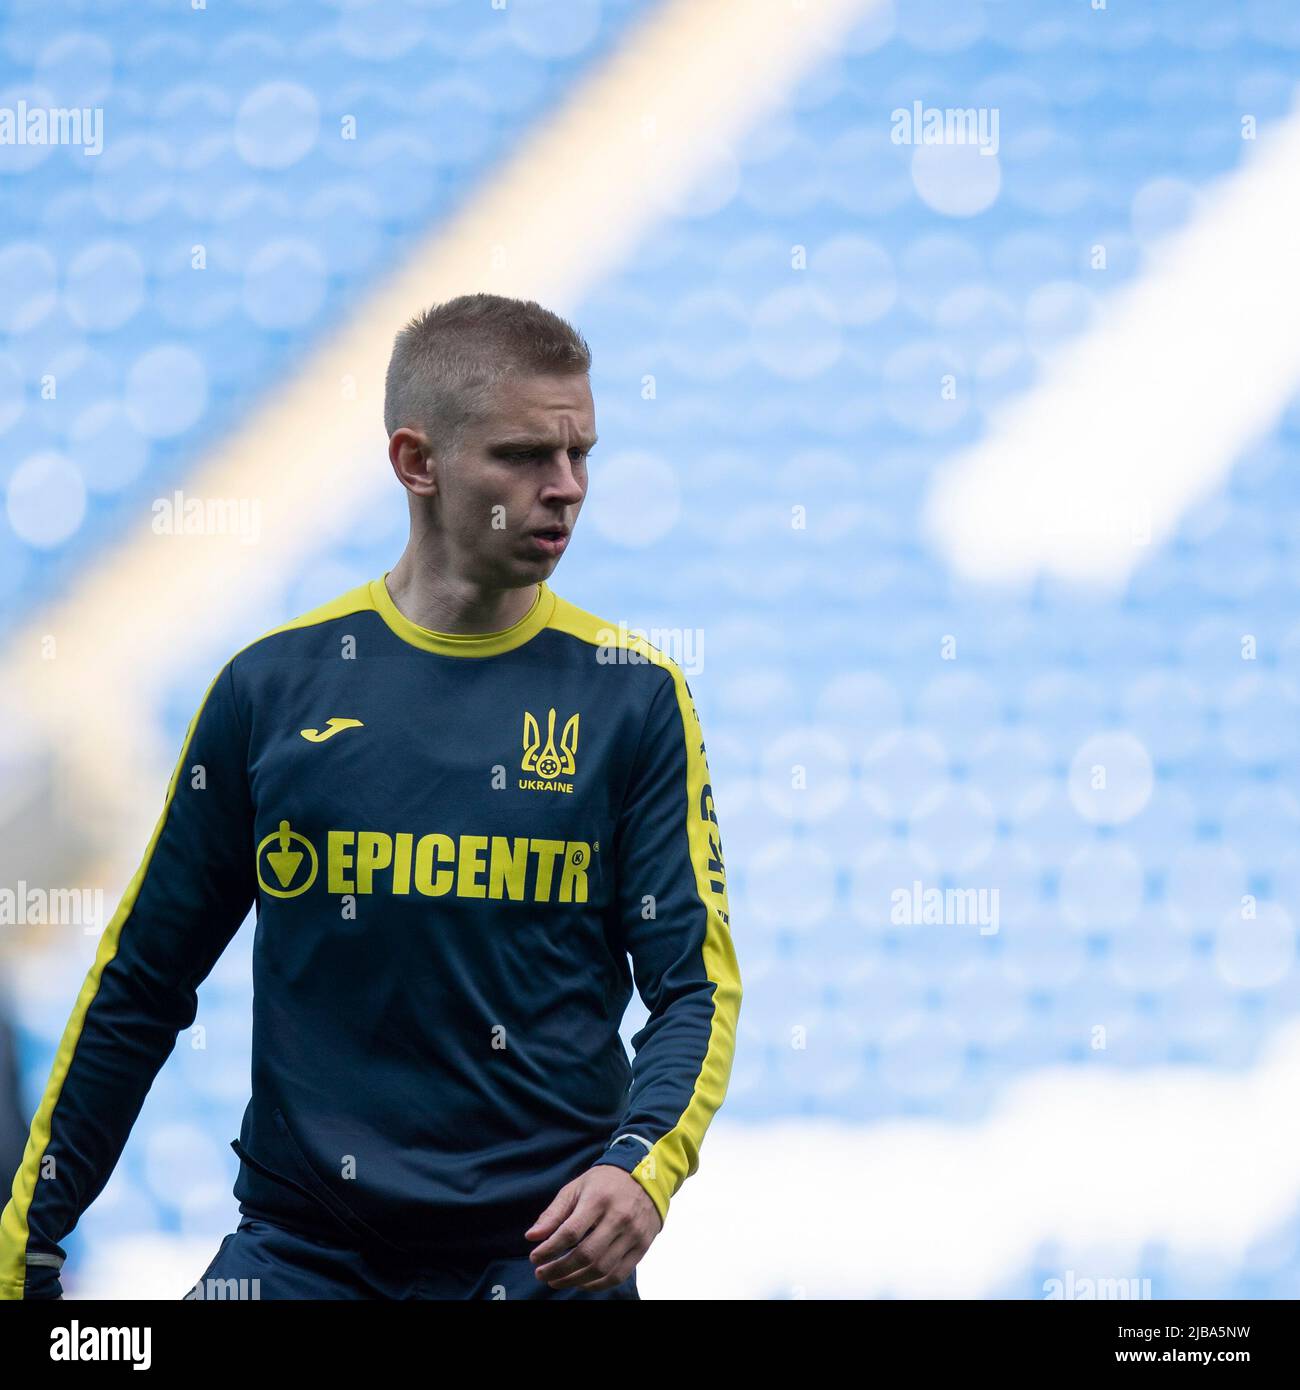 Cardiff, Wales, UK. 4th June, 2022. Oleksandr Zinchenko during Ukraine national football team training at the Cardiff City Stadium ahead of the FIFA World Cup play-off final match against Wales. Credit: Mark Hawkins/Alamy Live News Stock Photo